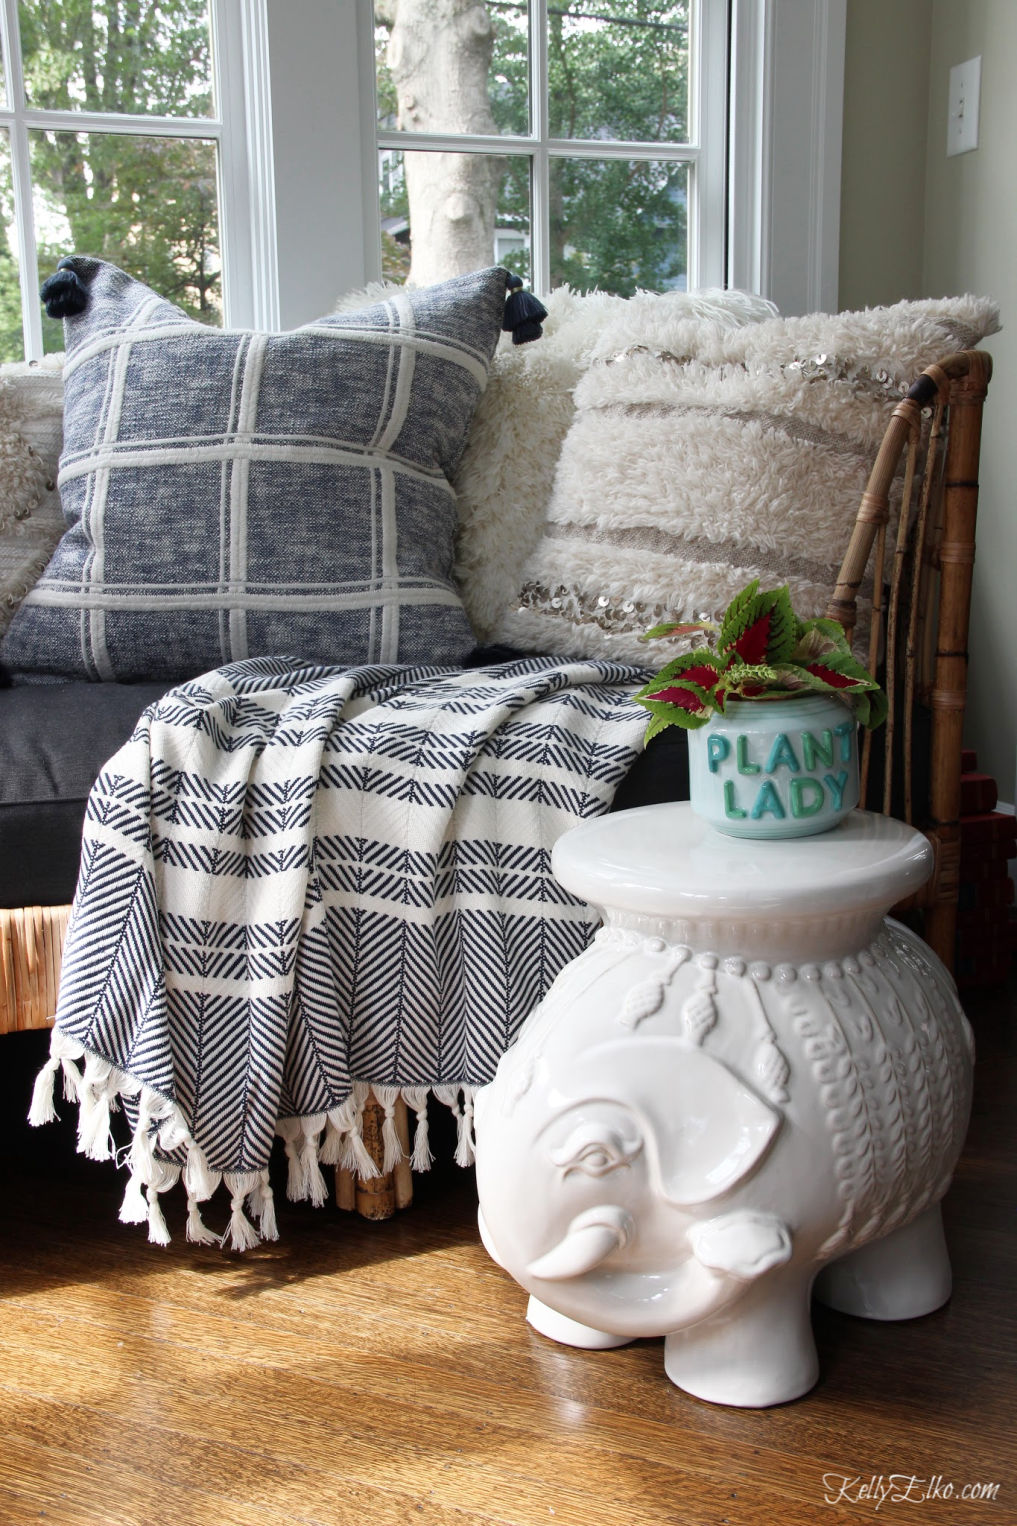 I love rattan daybed with cozy pillows and throws in blue and white and the ceramic elephant stool - see all of my Serena and Lily Sale Picks kellyelkoi.com #bohodecor #boho #serenaandlily #elephant #daybed #rattanfurniture #blueandwhitedecor #homedecor 